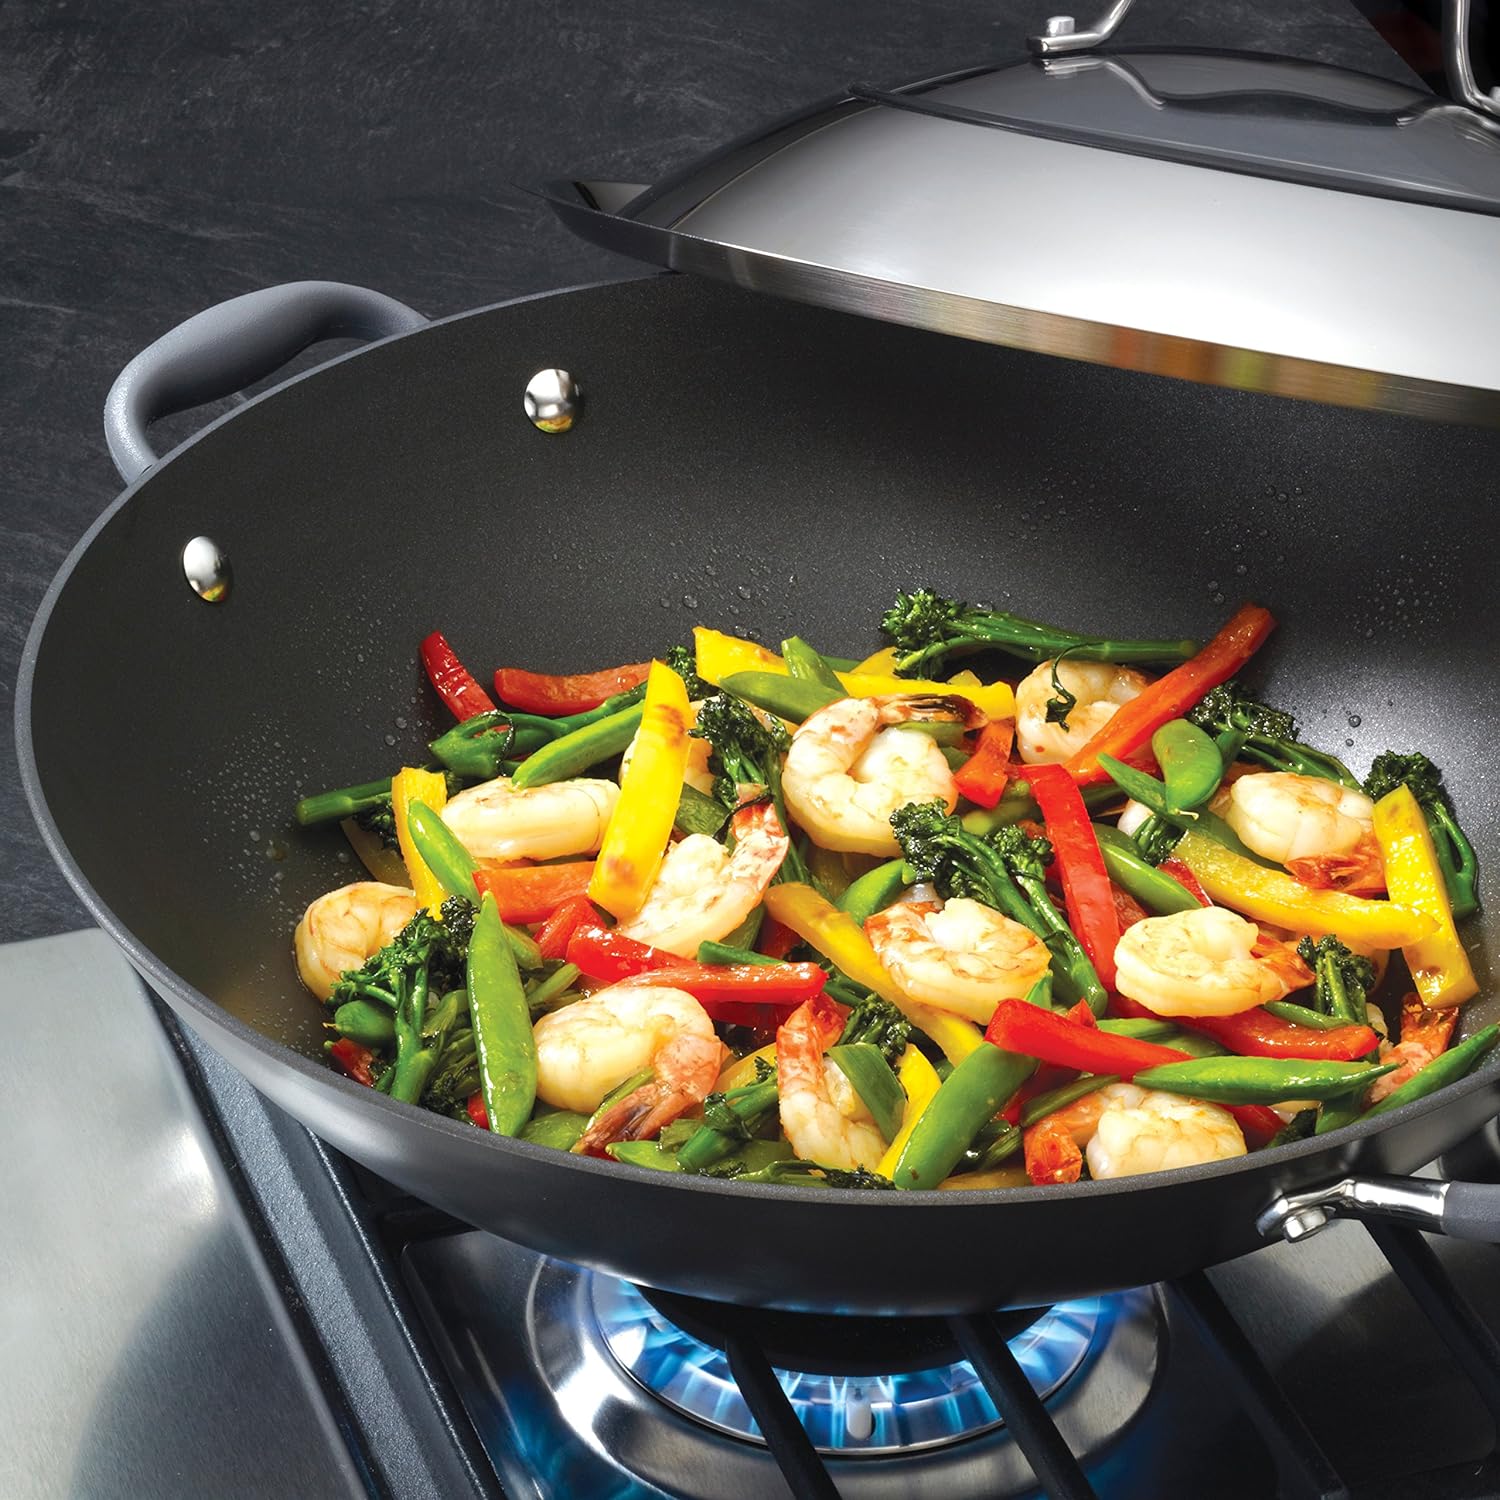 Anolon Advanced Hard Anodized Nonstick Stir Fry Wok Pan with Lid, 14 Inch, Gray